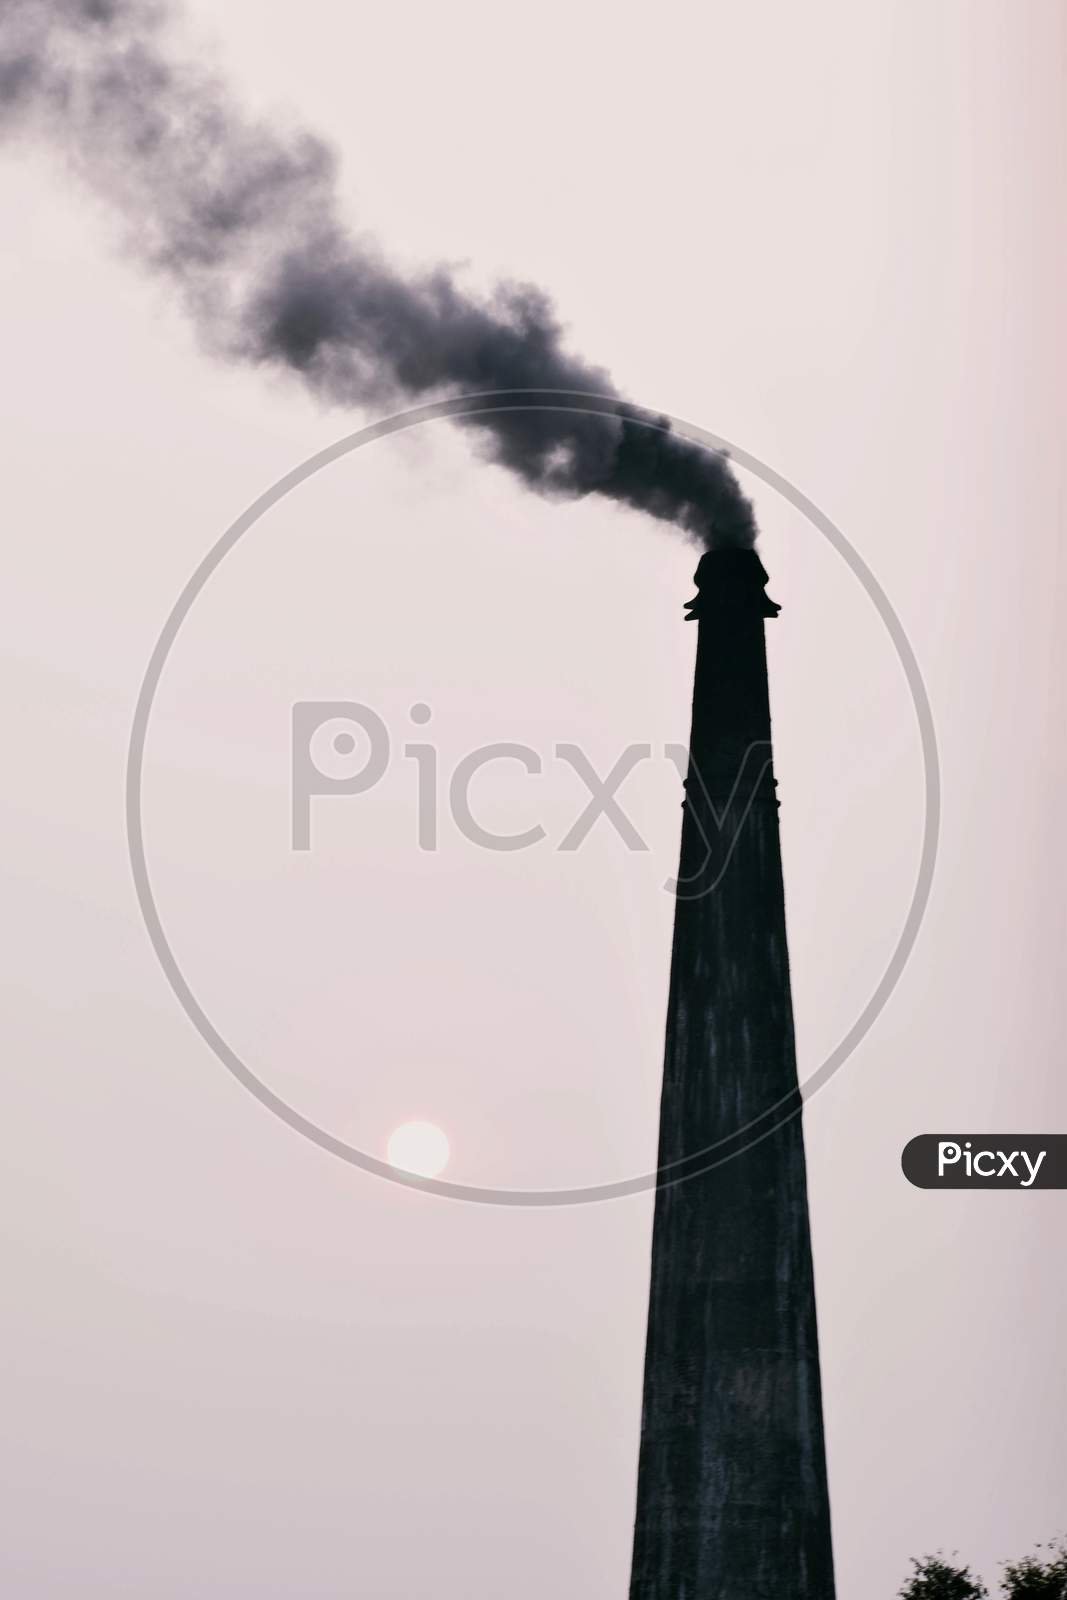 Beautiful Picture Of Chimney And Smoke Comes Out From It. Isolated On White. Selective Focus